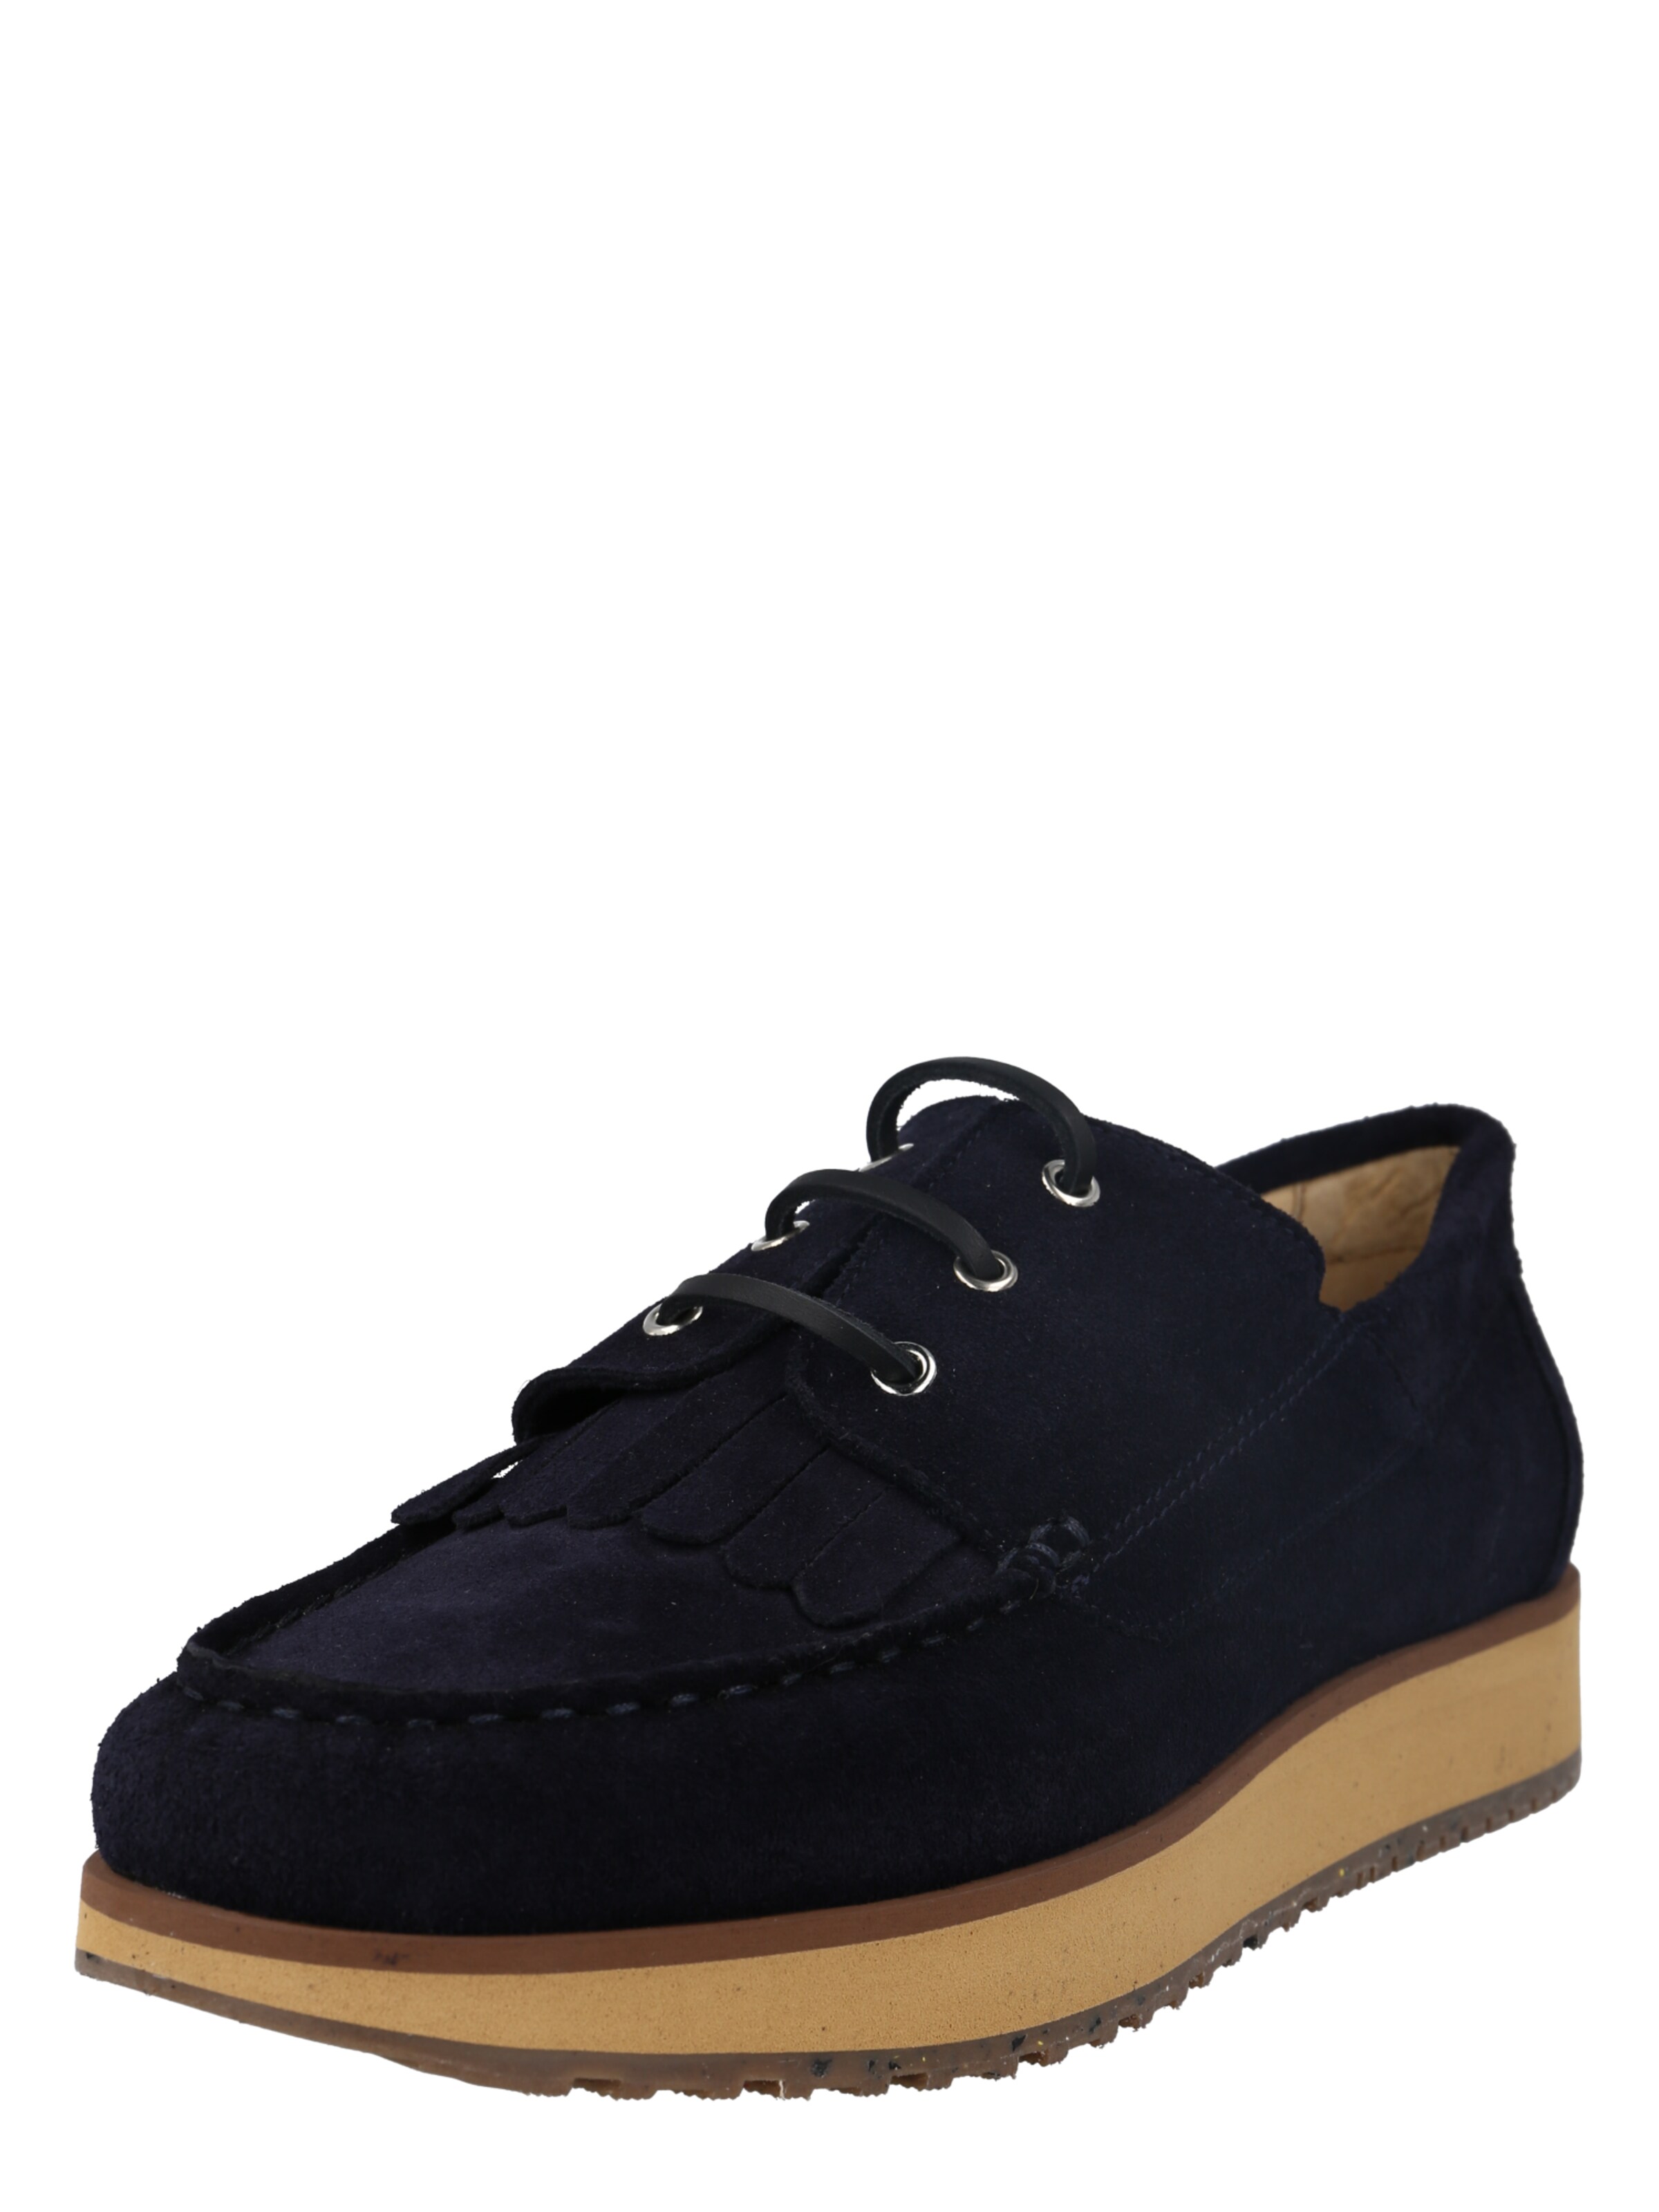 Men Low shoes | SELECTED HOMME Lace-Up Shoes 'WILLUM' in Navy - MB21557